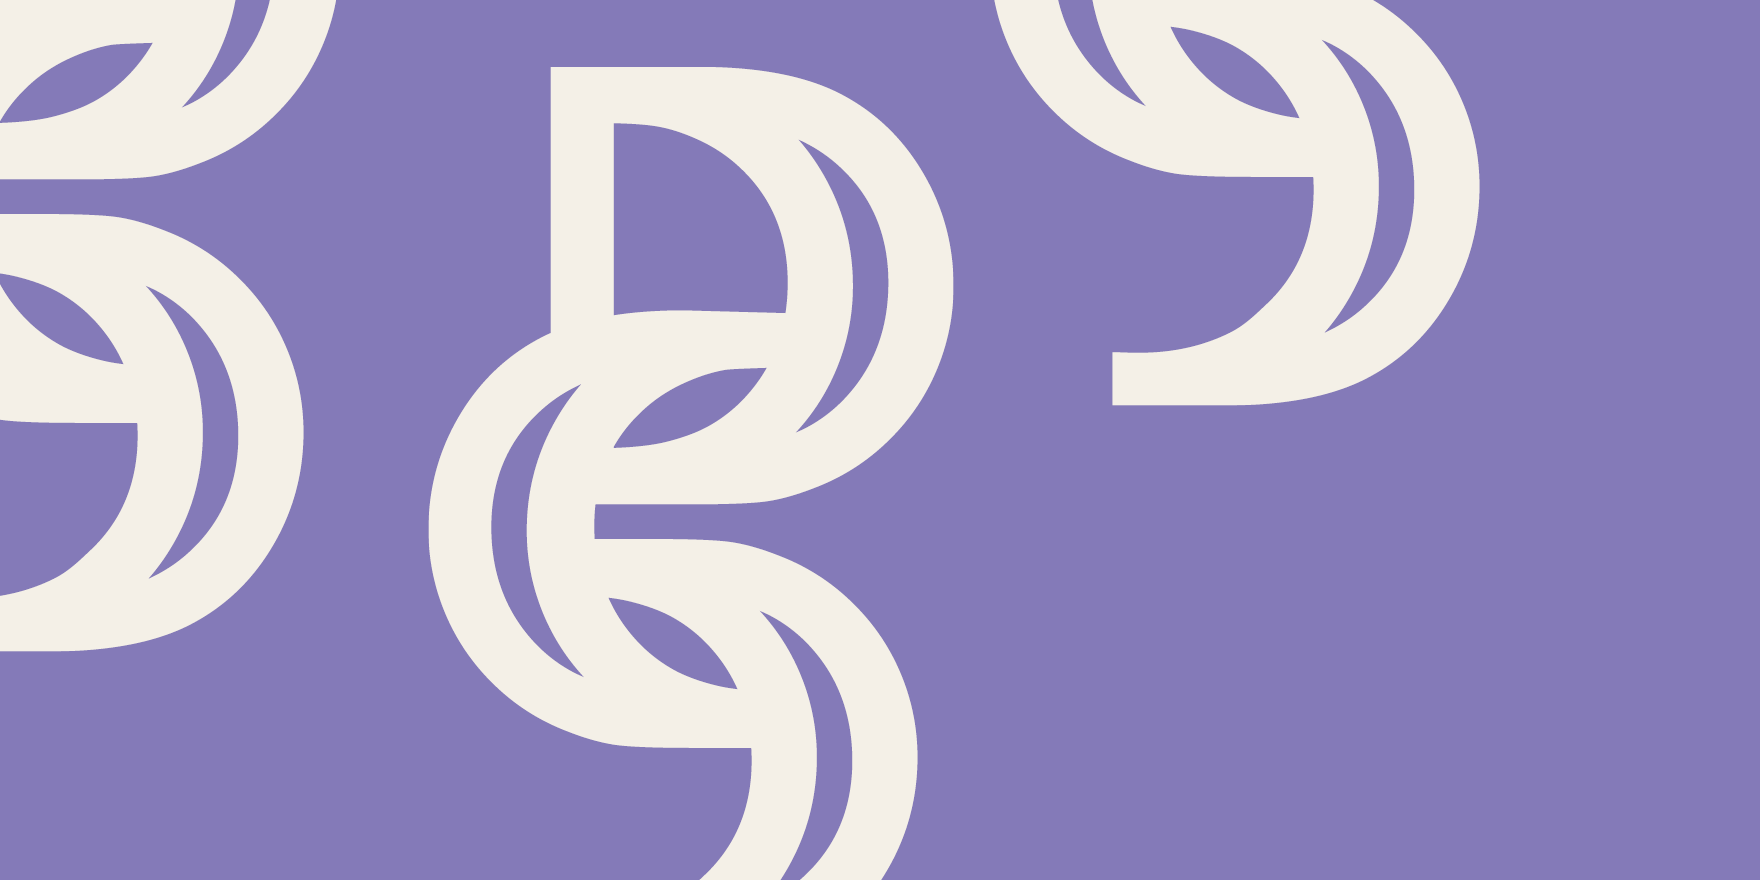 Abstract illustration of the letters D and S in white, intertwined on a purple background